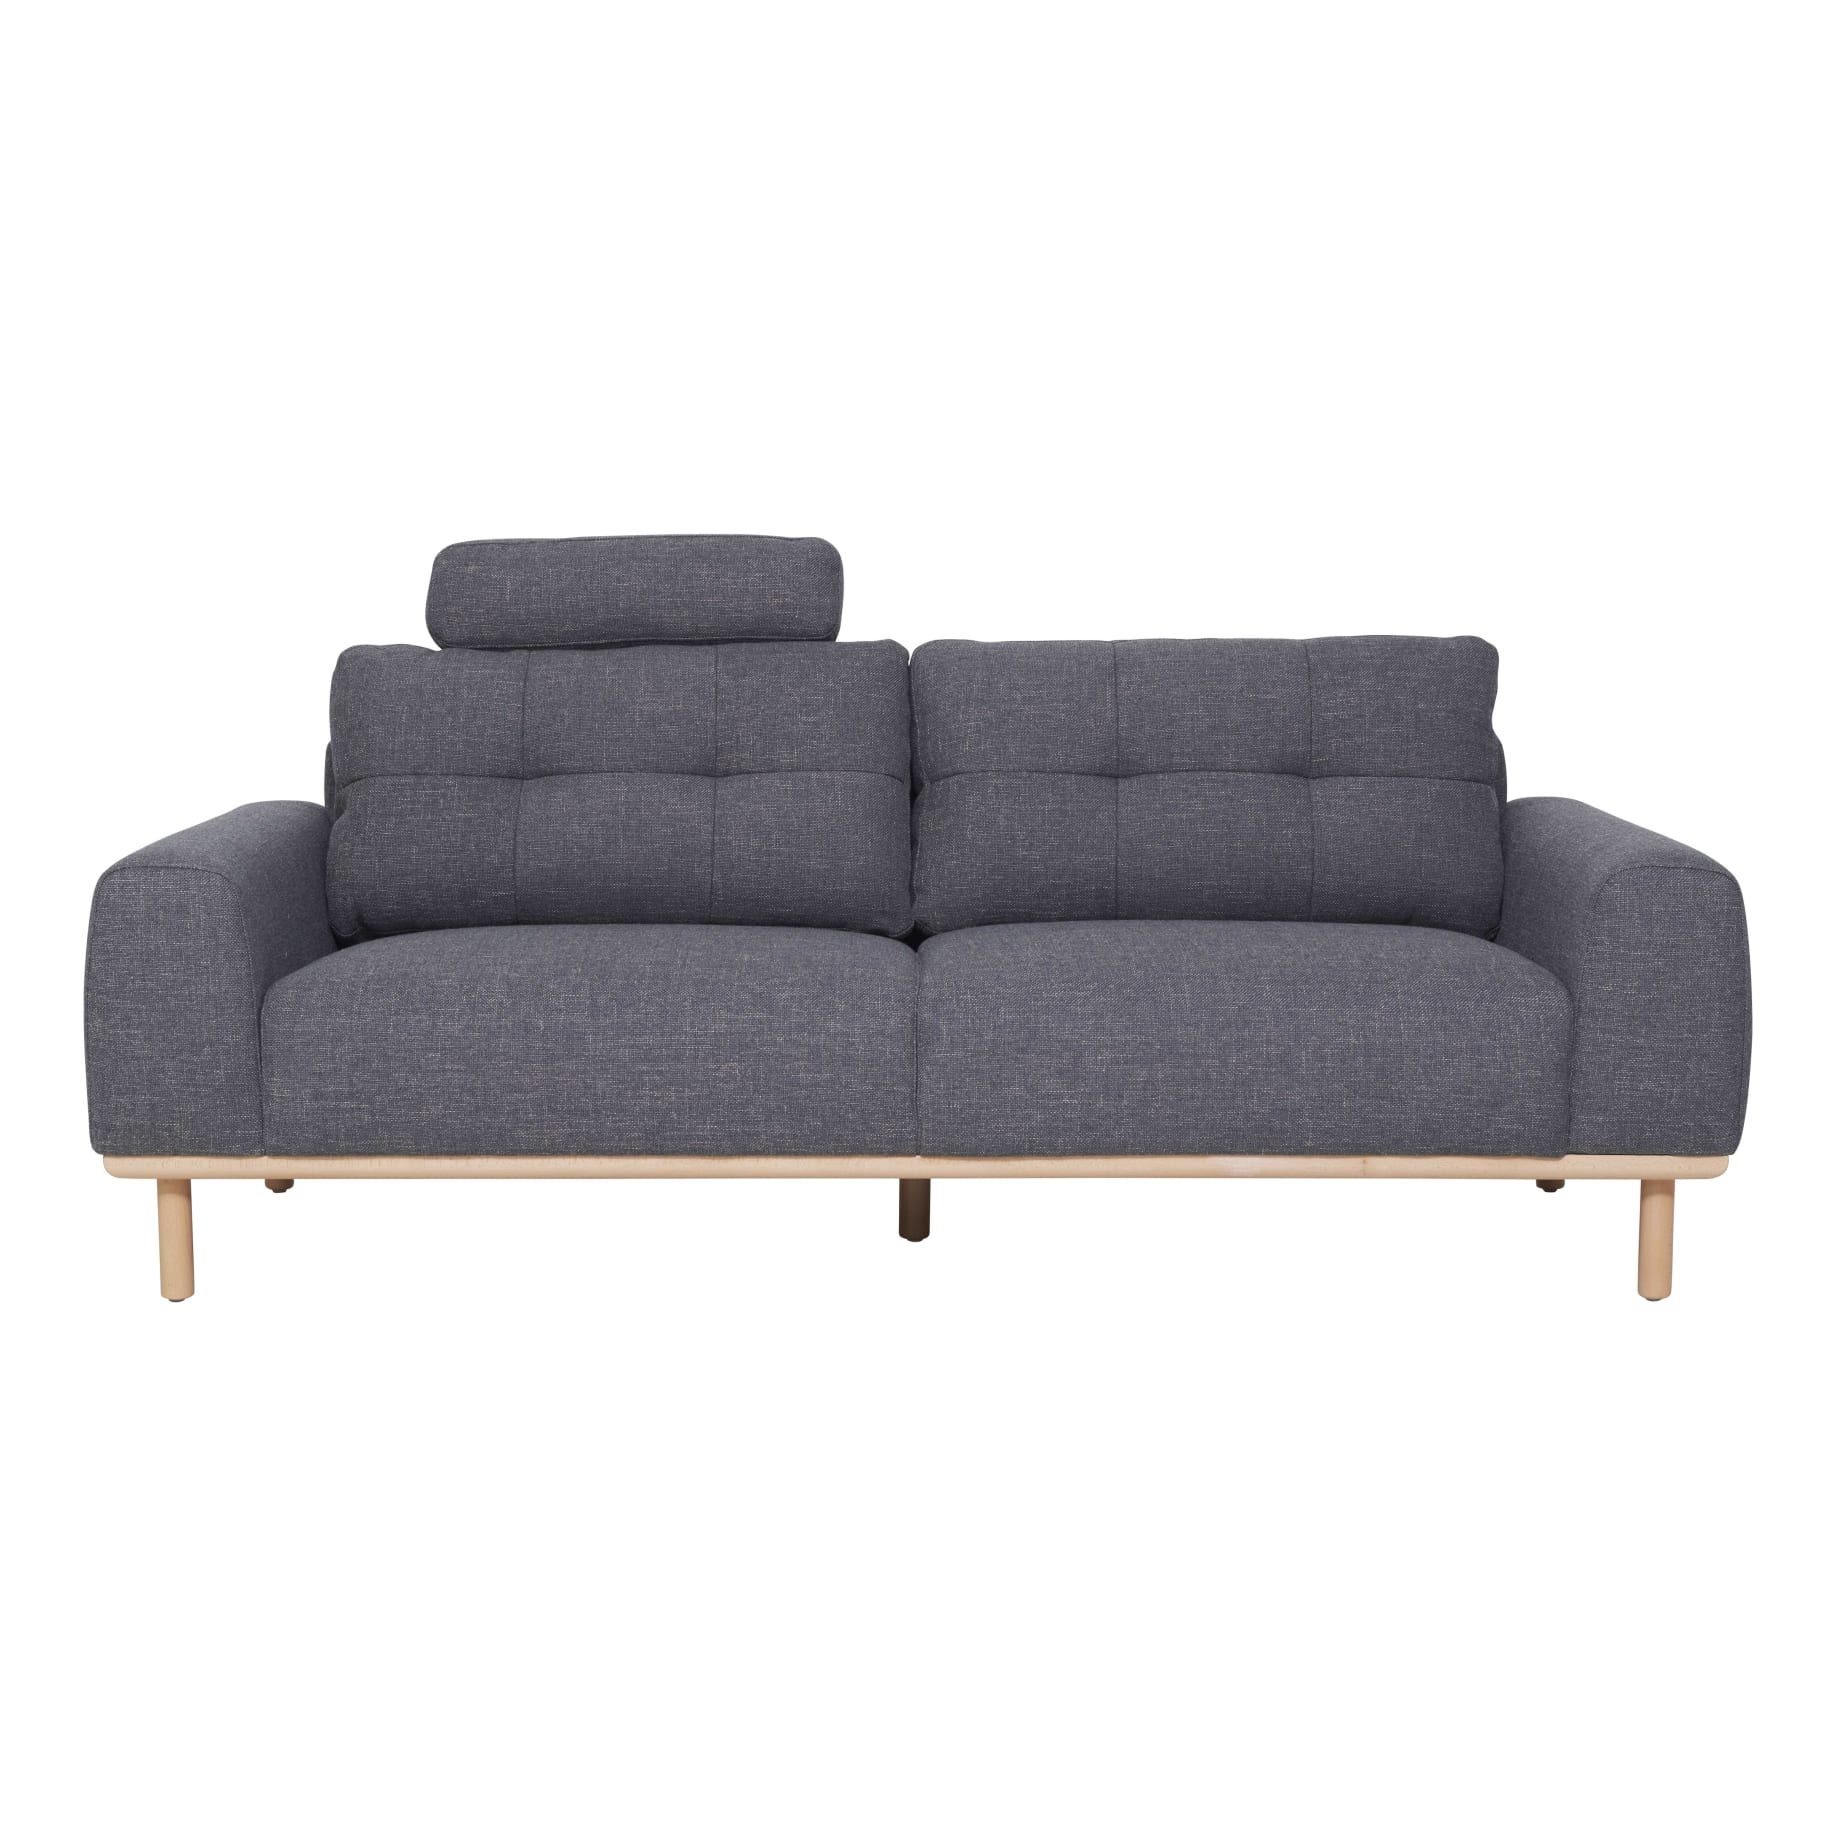 Stratton 3 Seater Sofa in Cloud Storm